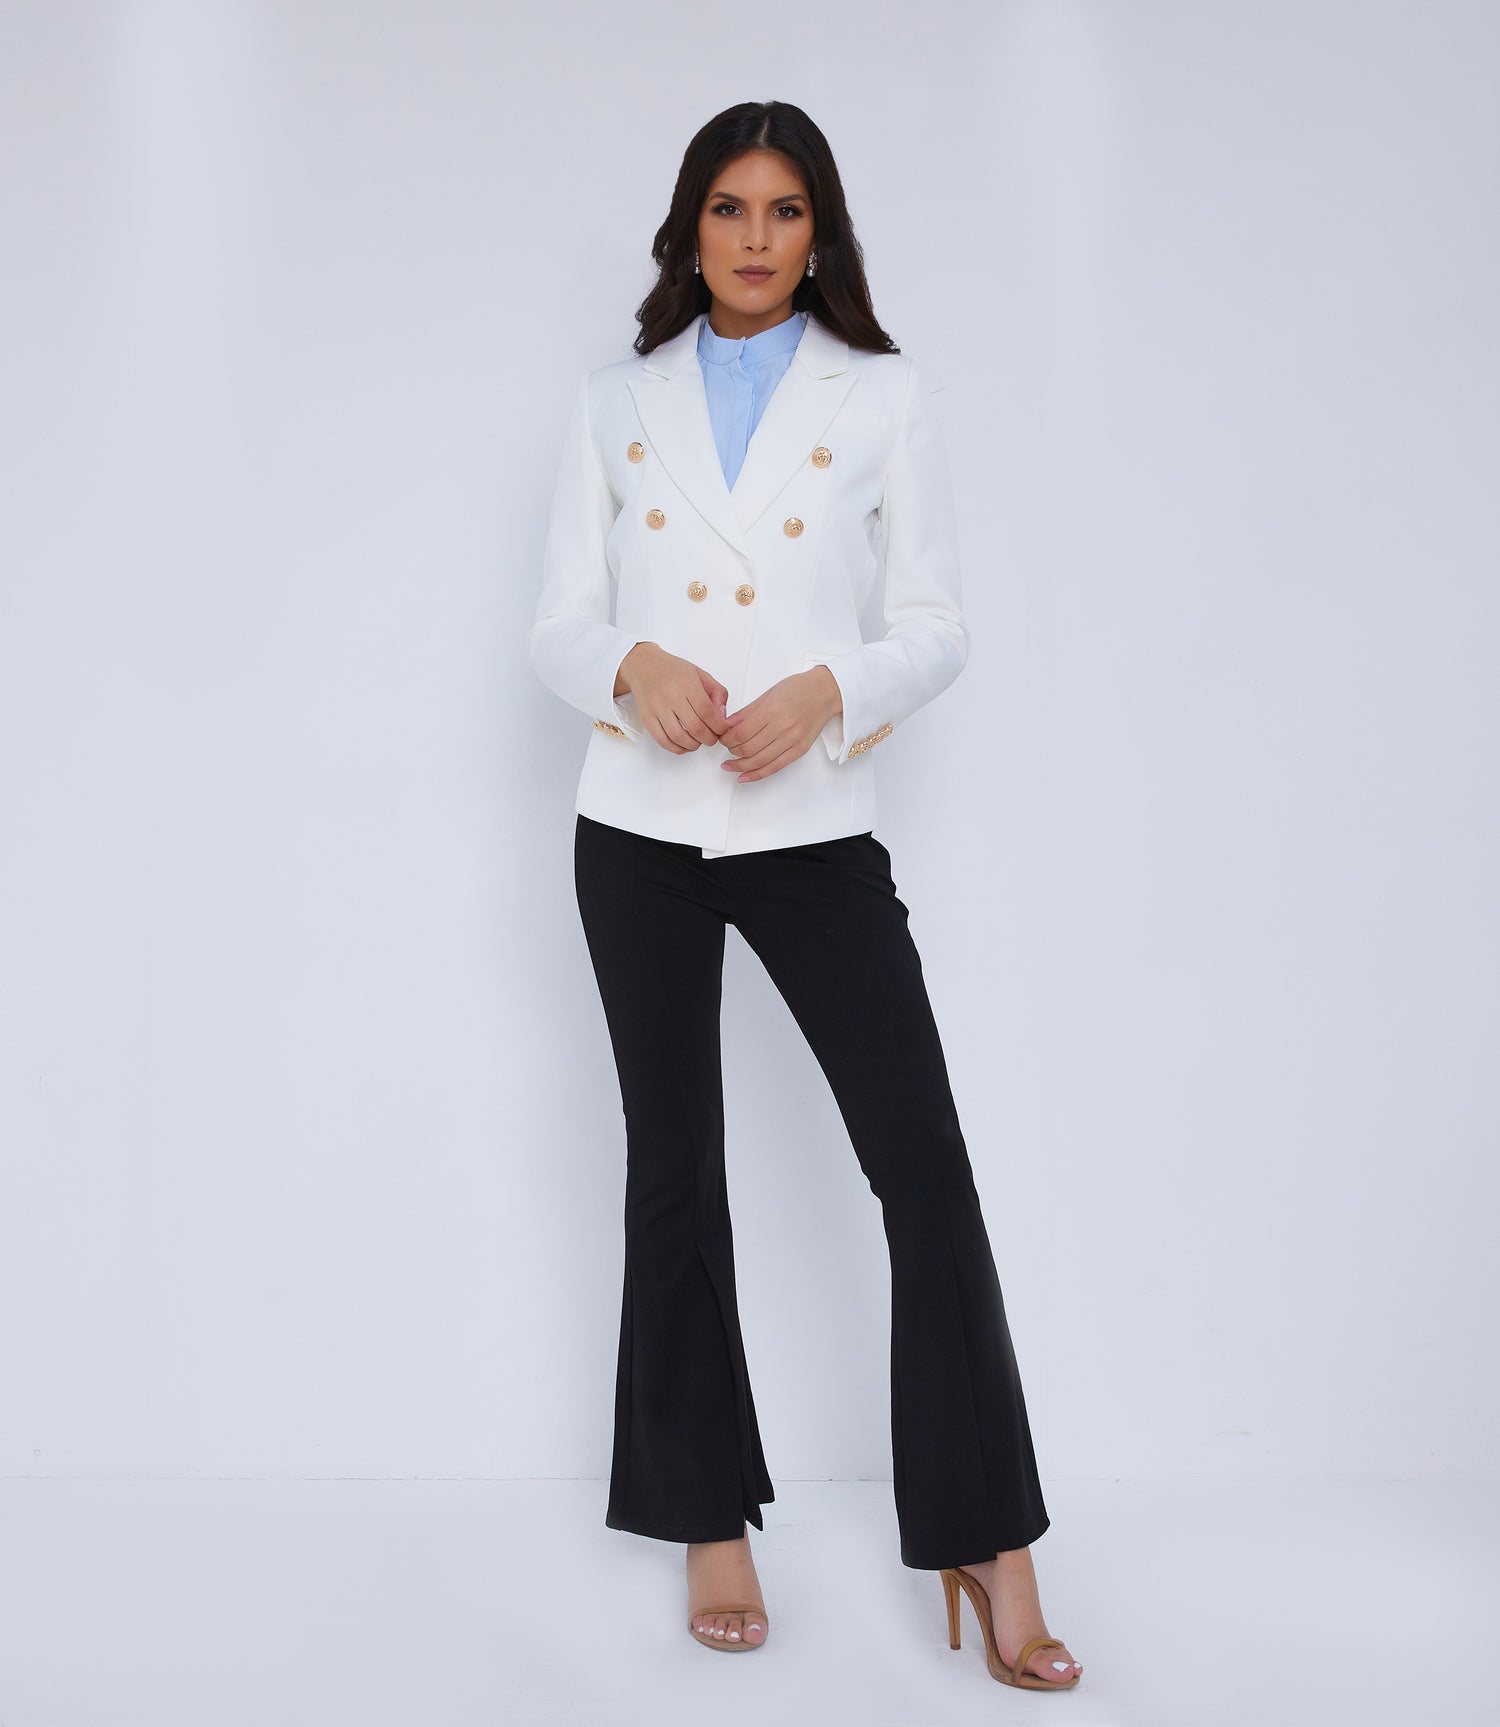 Women's White Double Breasted Blazer Gold Buttons UK